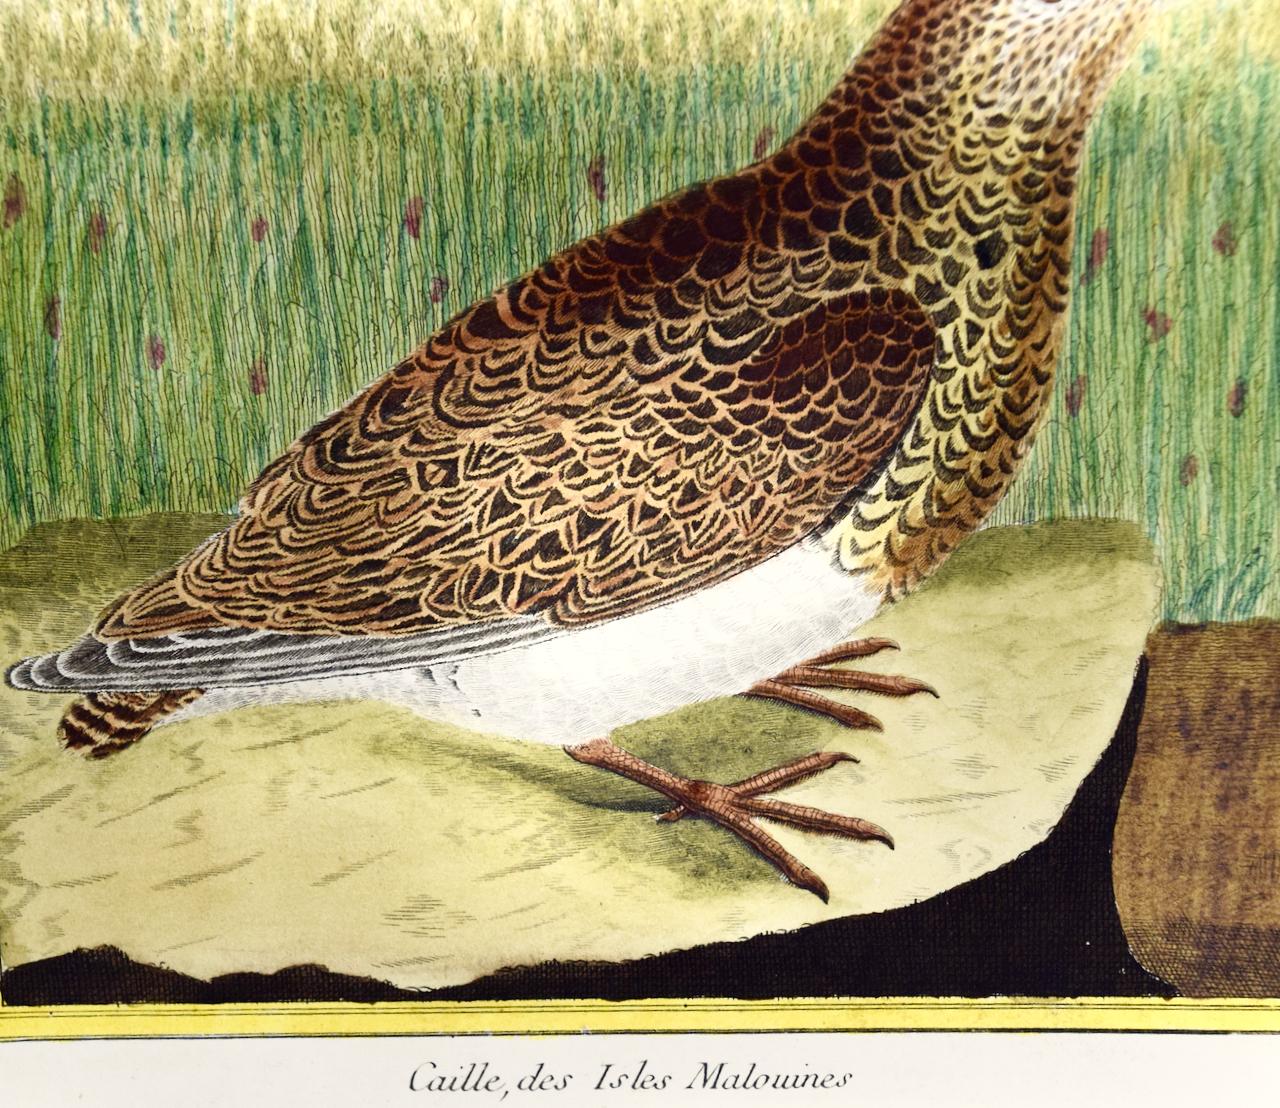 A Falkland Island Quail: An 18th Century Hand-colored Engraving by Martinet - Naturalistic Print by Francois Nicolas Martinet